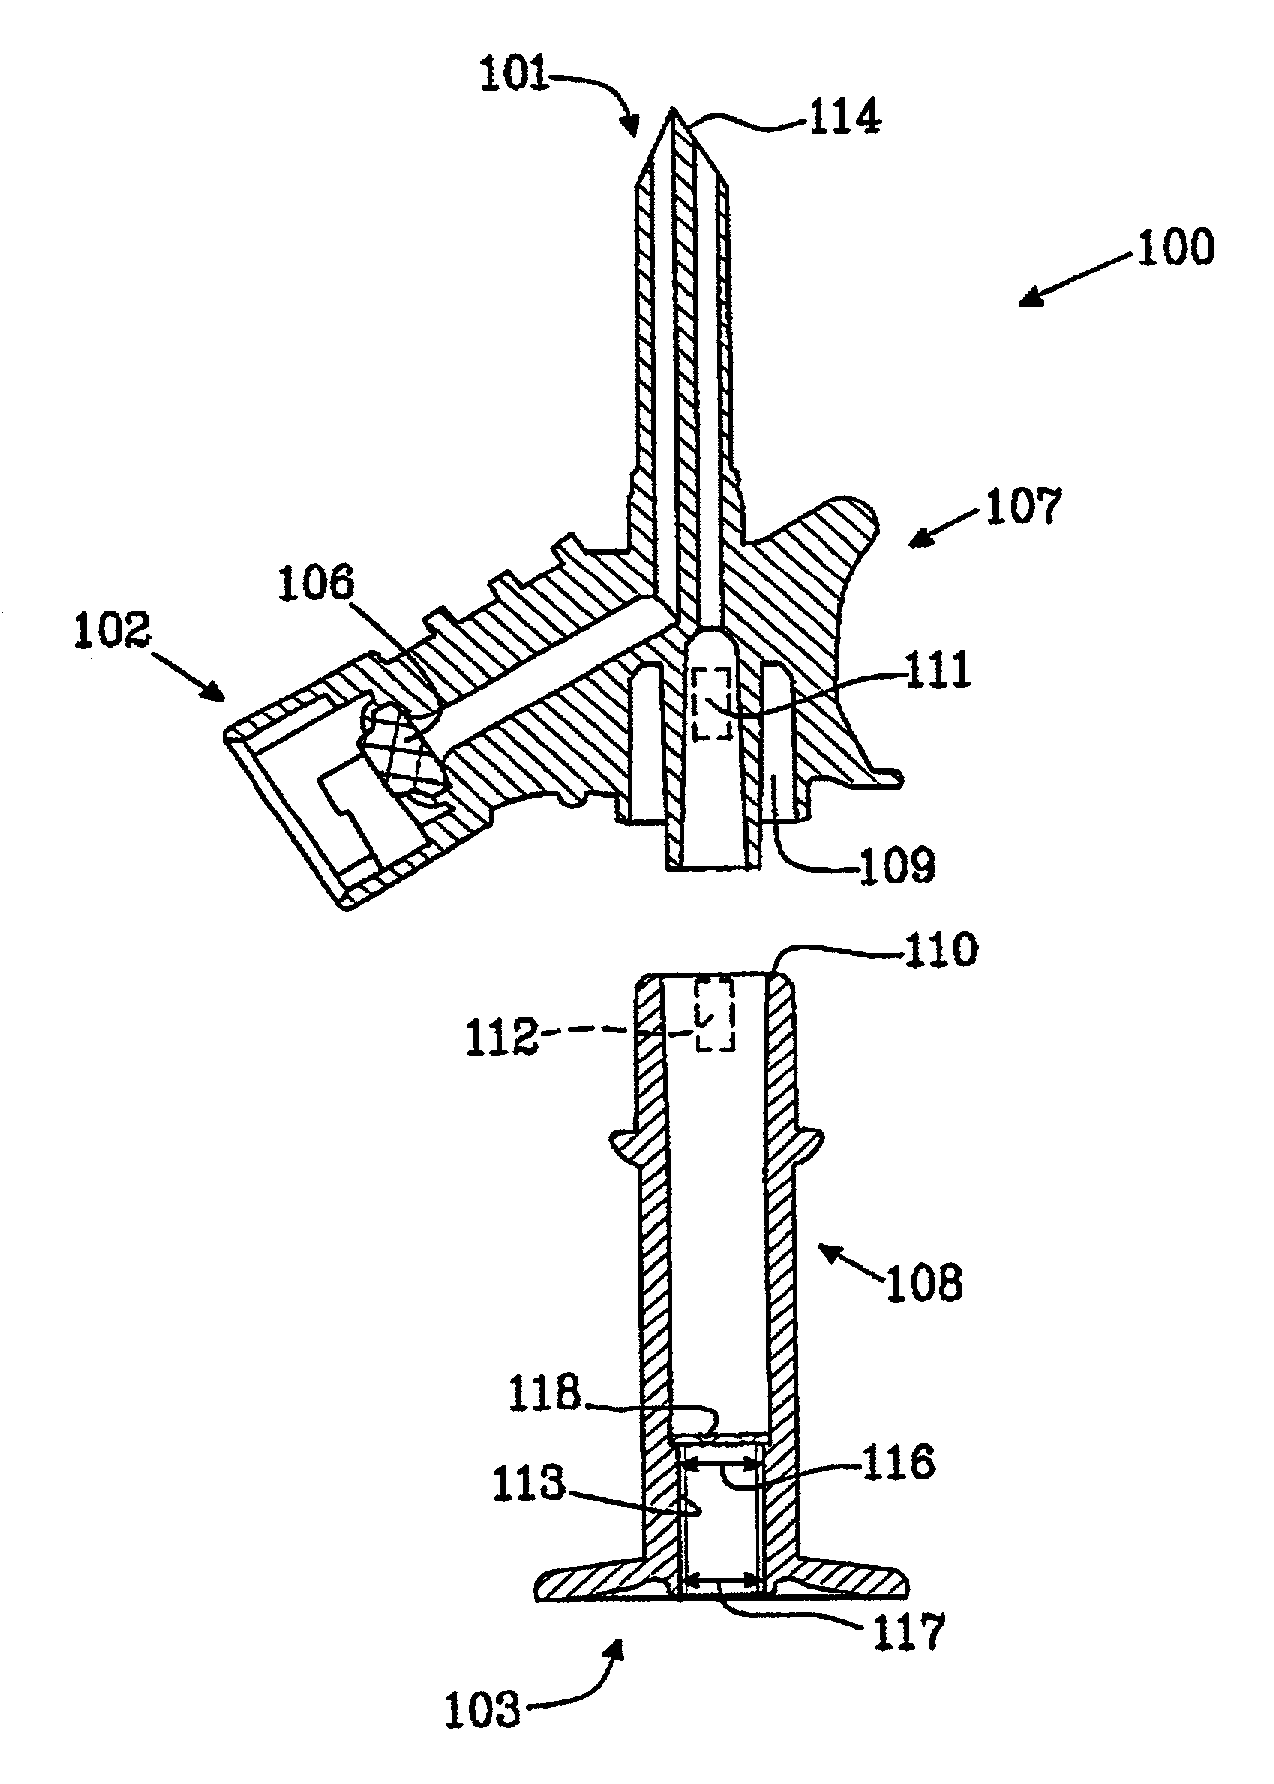 Device and method for mixing medical fluids